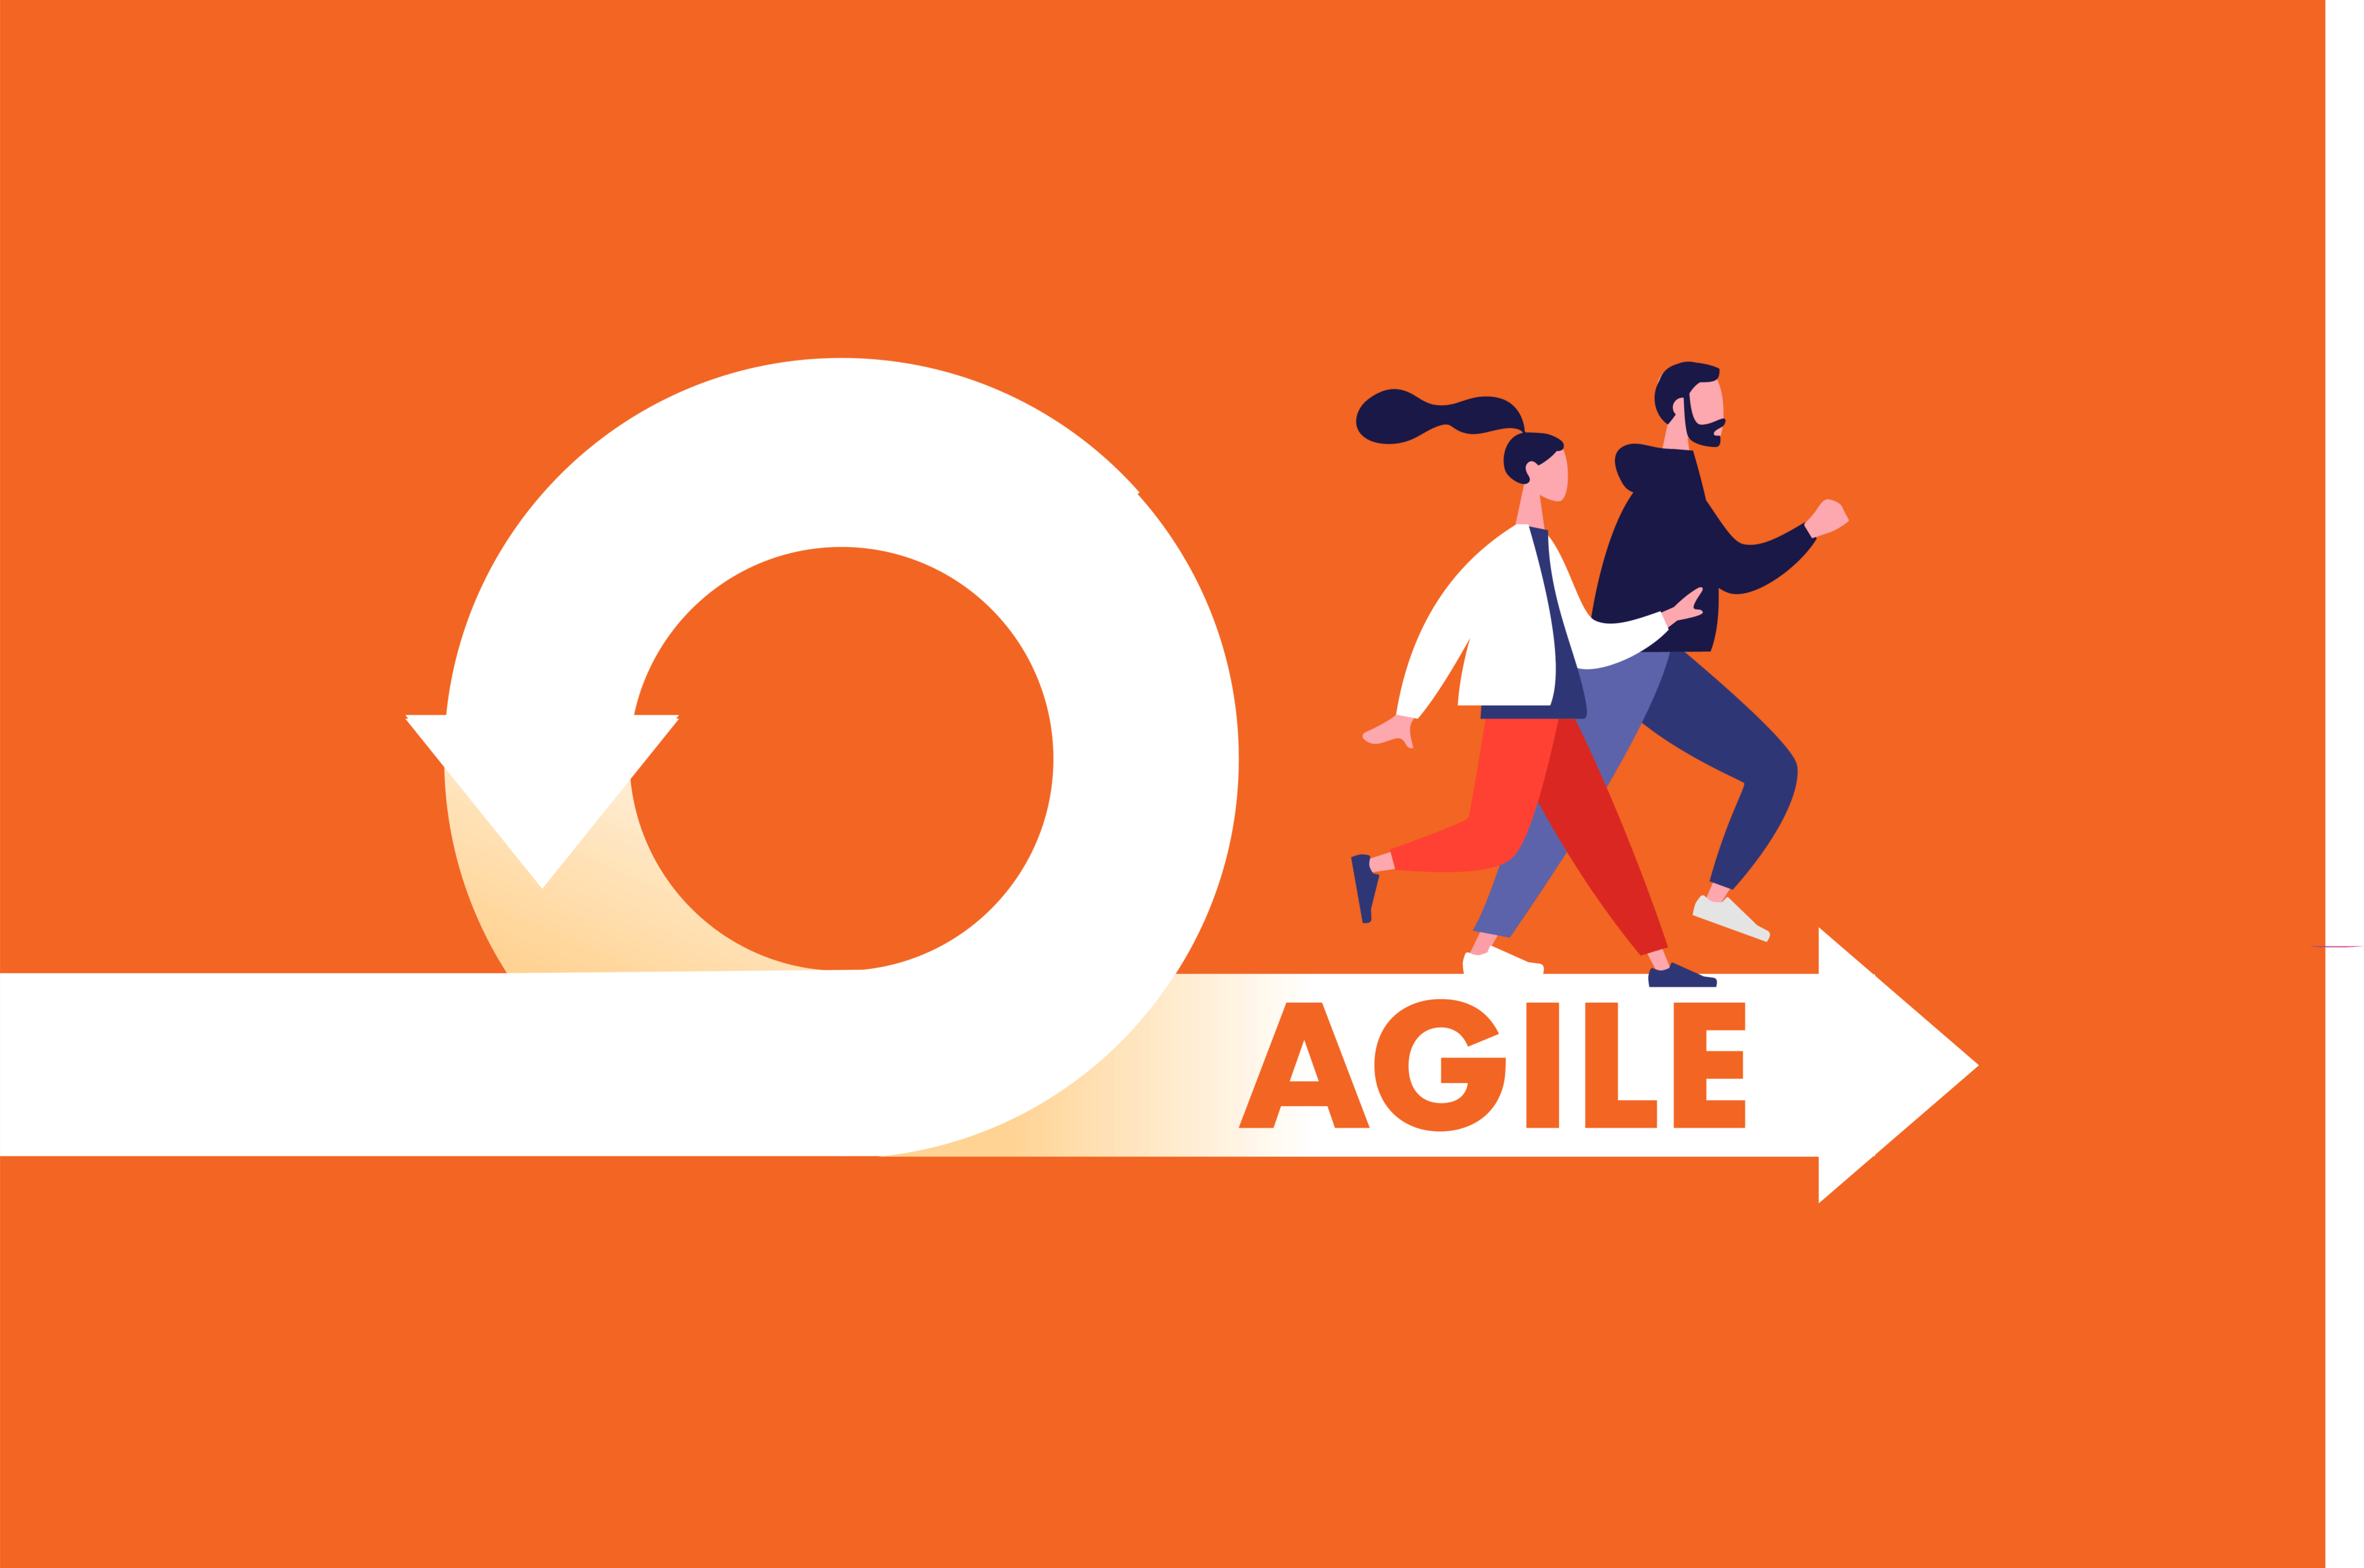 10 Agile Terms You Should Know